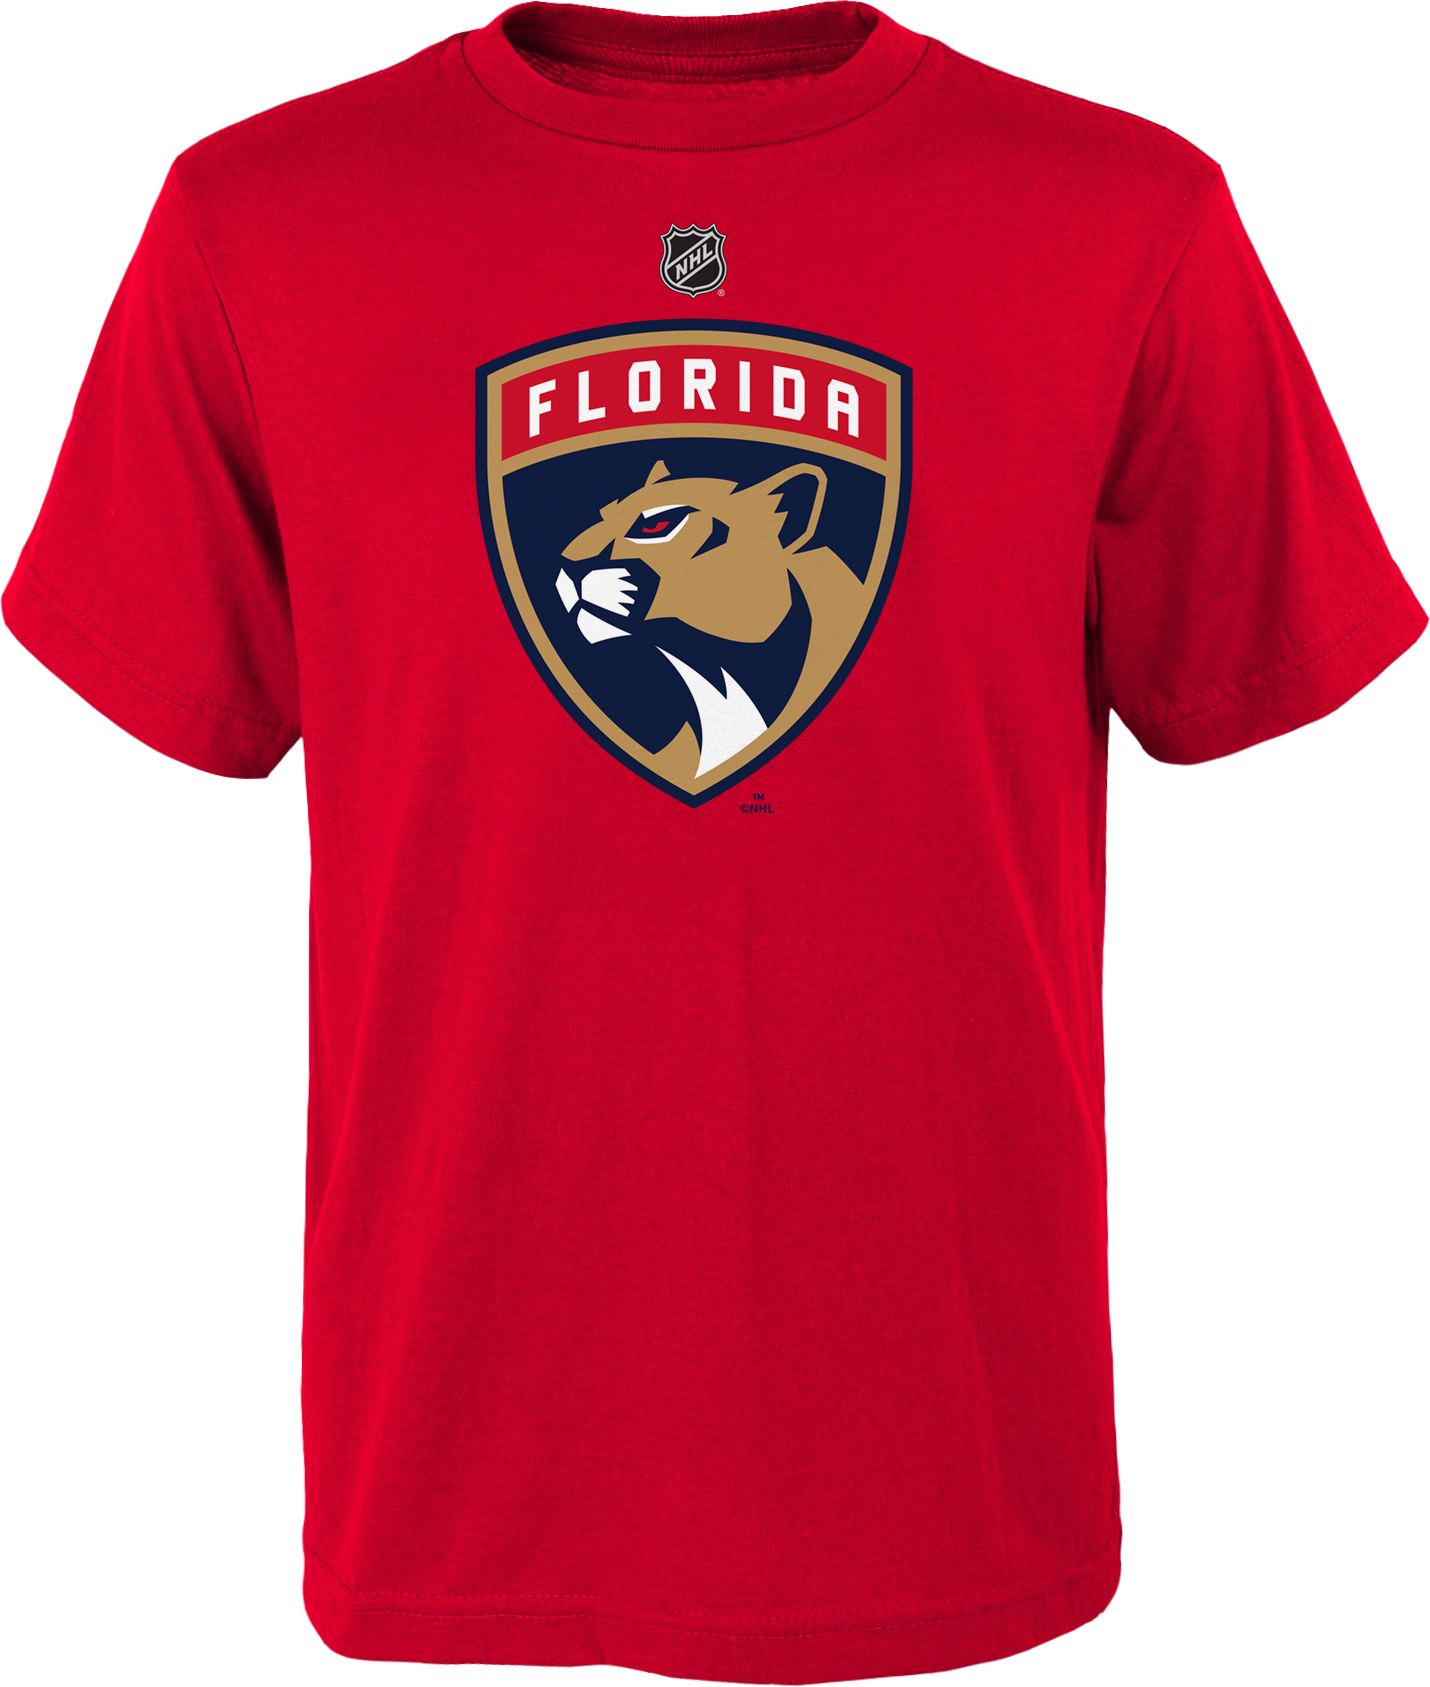 Florida Panthers licensed merchandise